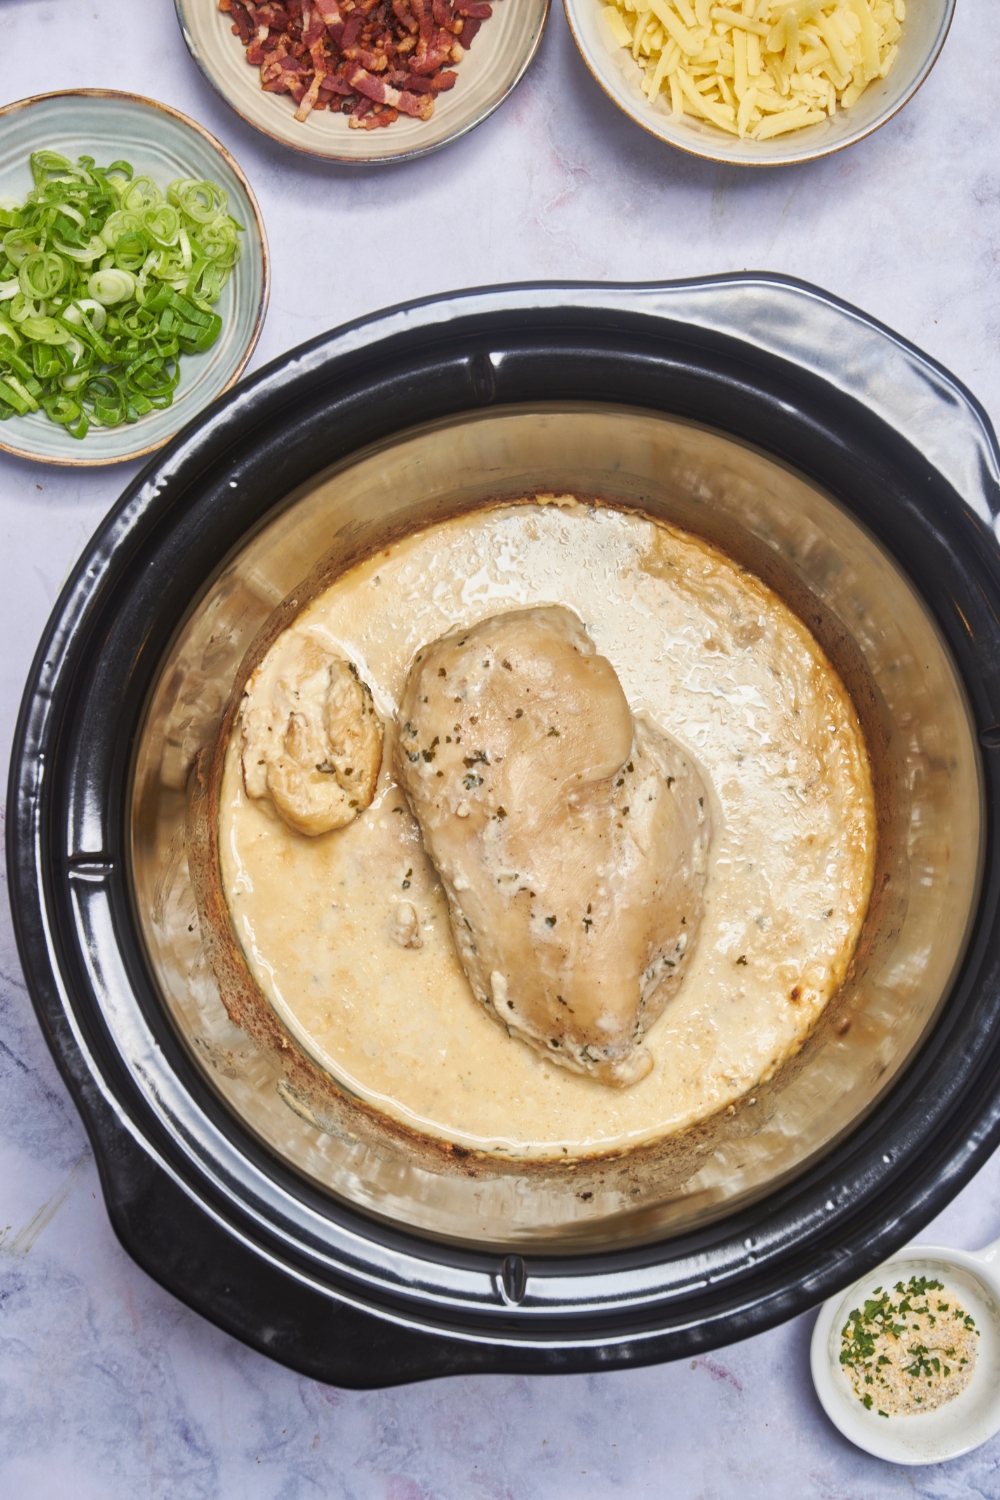 A cooked and seasoned chicken breast in a crock pot with a creamy seasoned sauce.